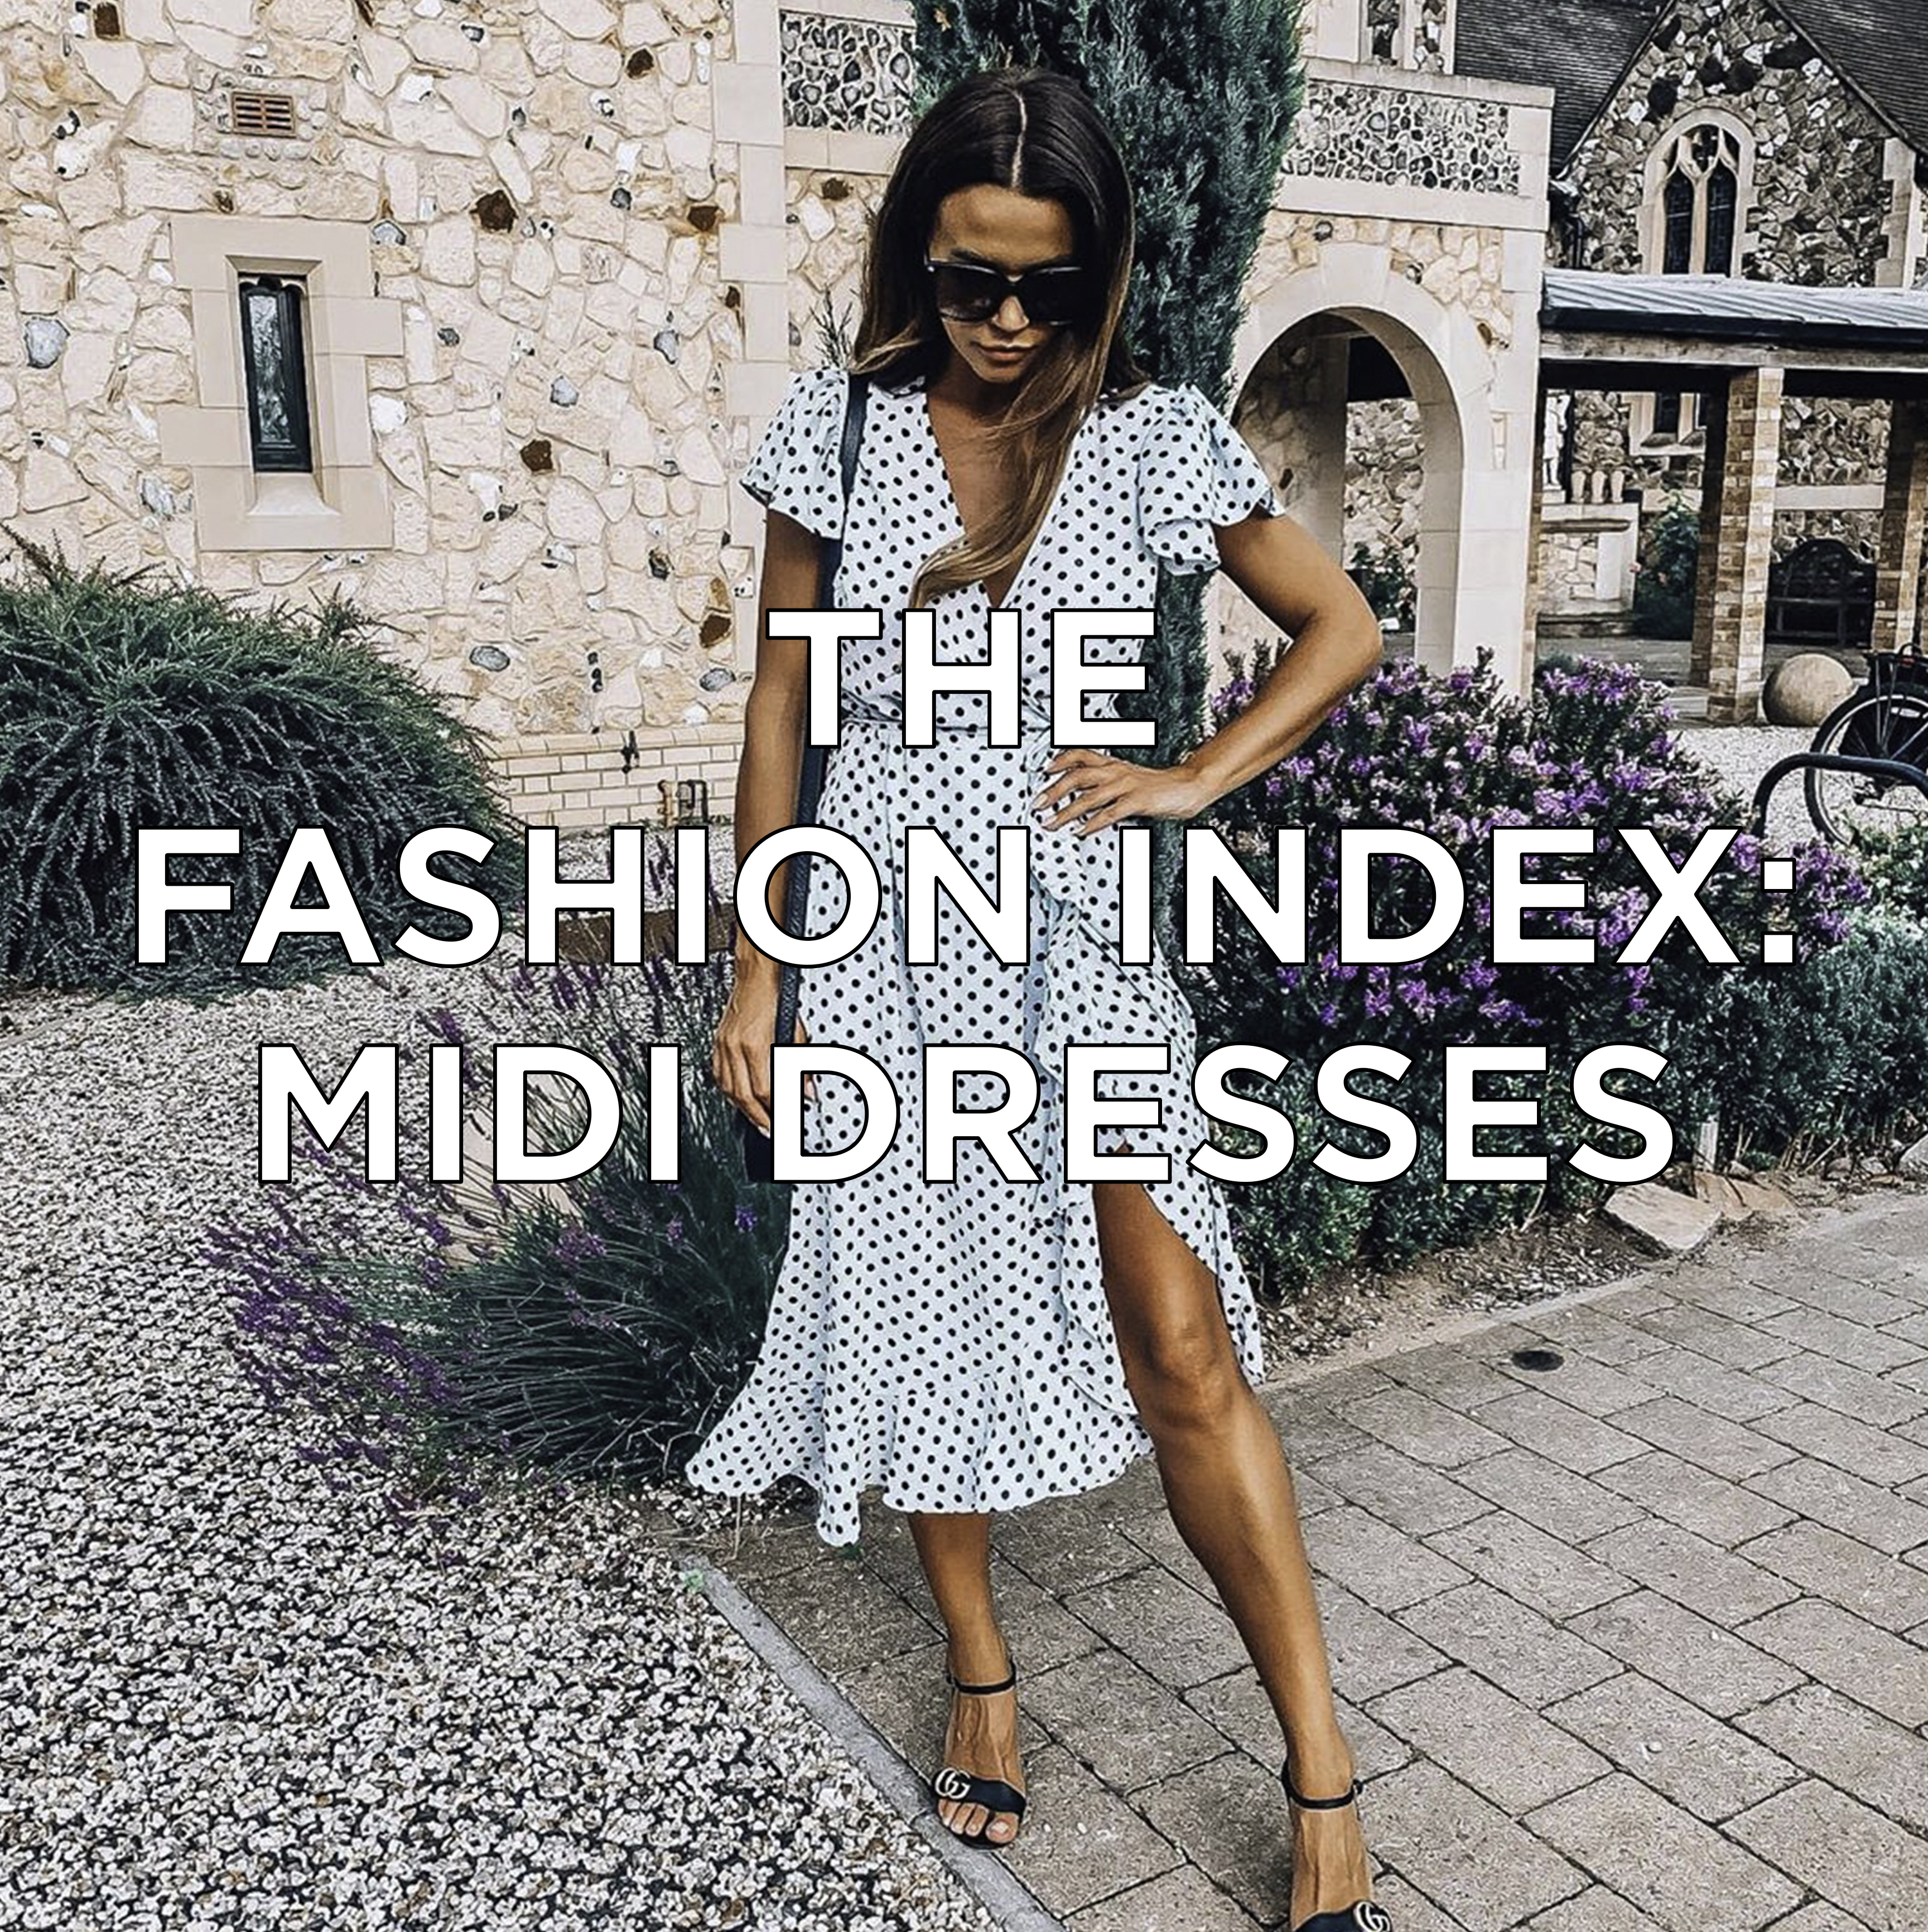 casual midi dress outfit